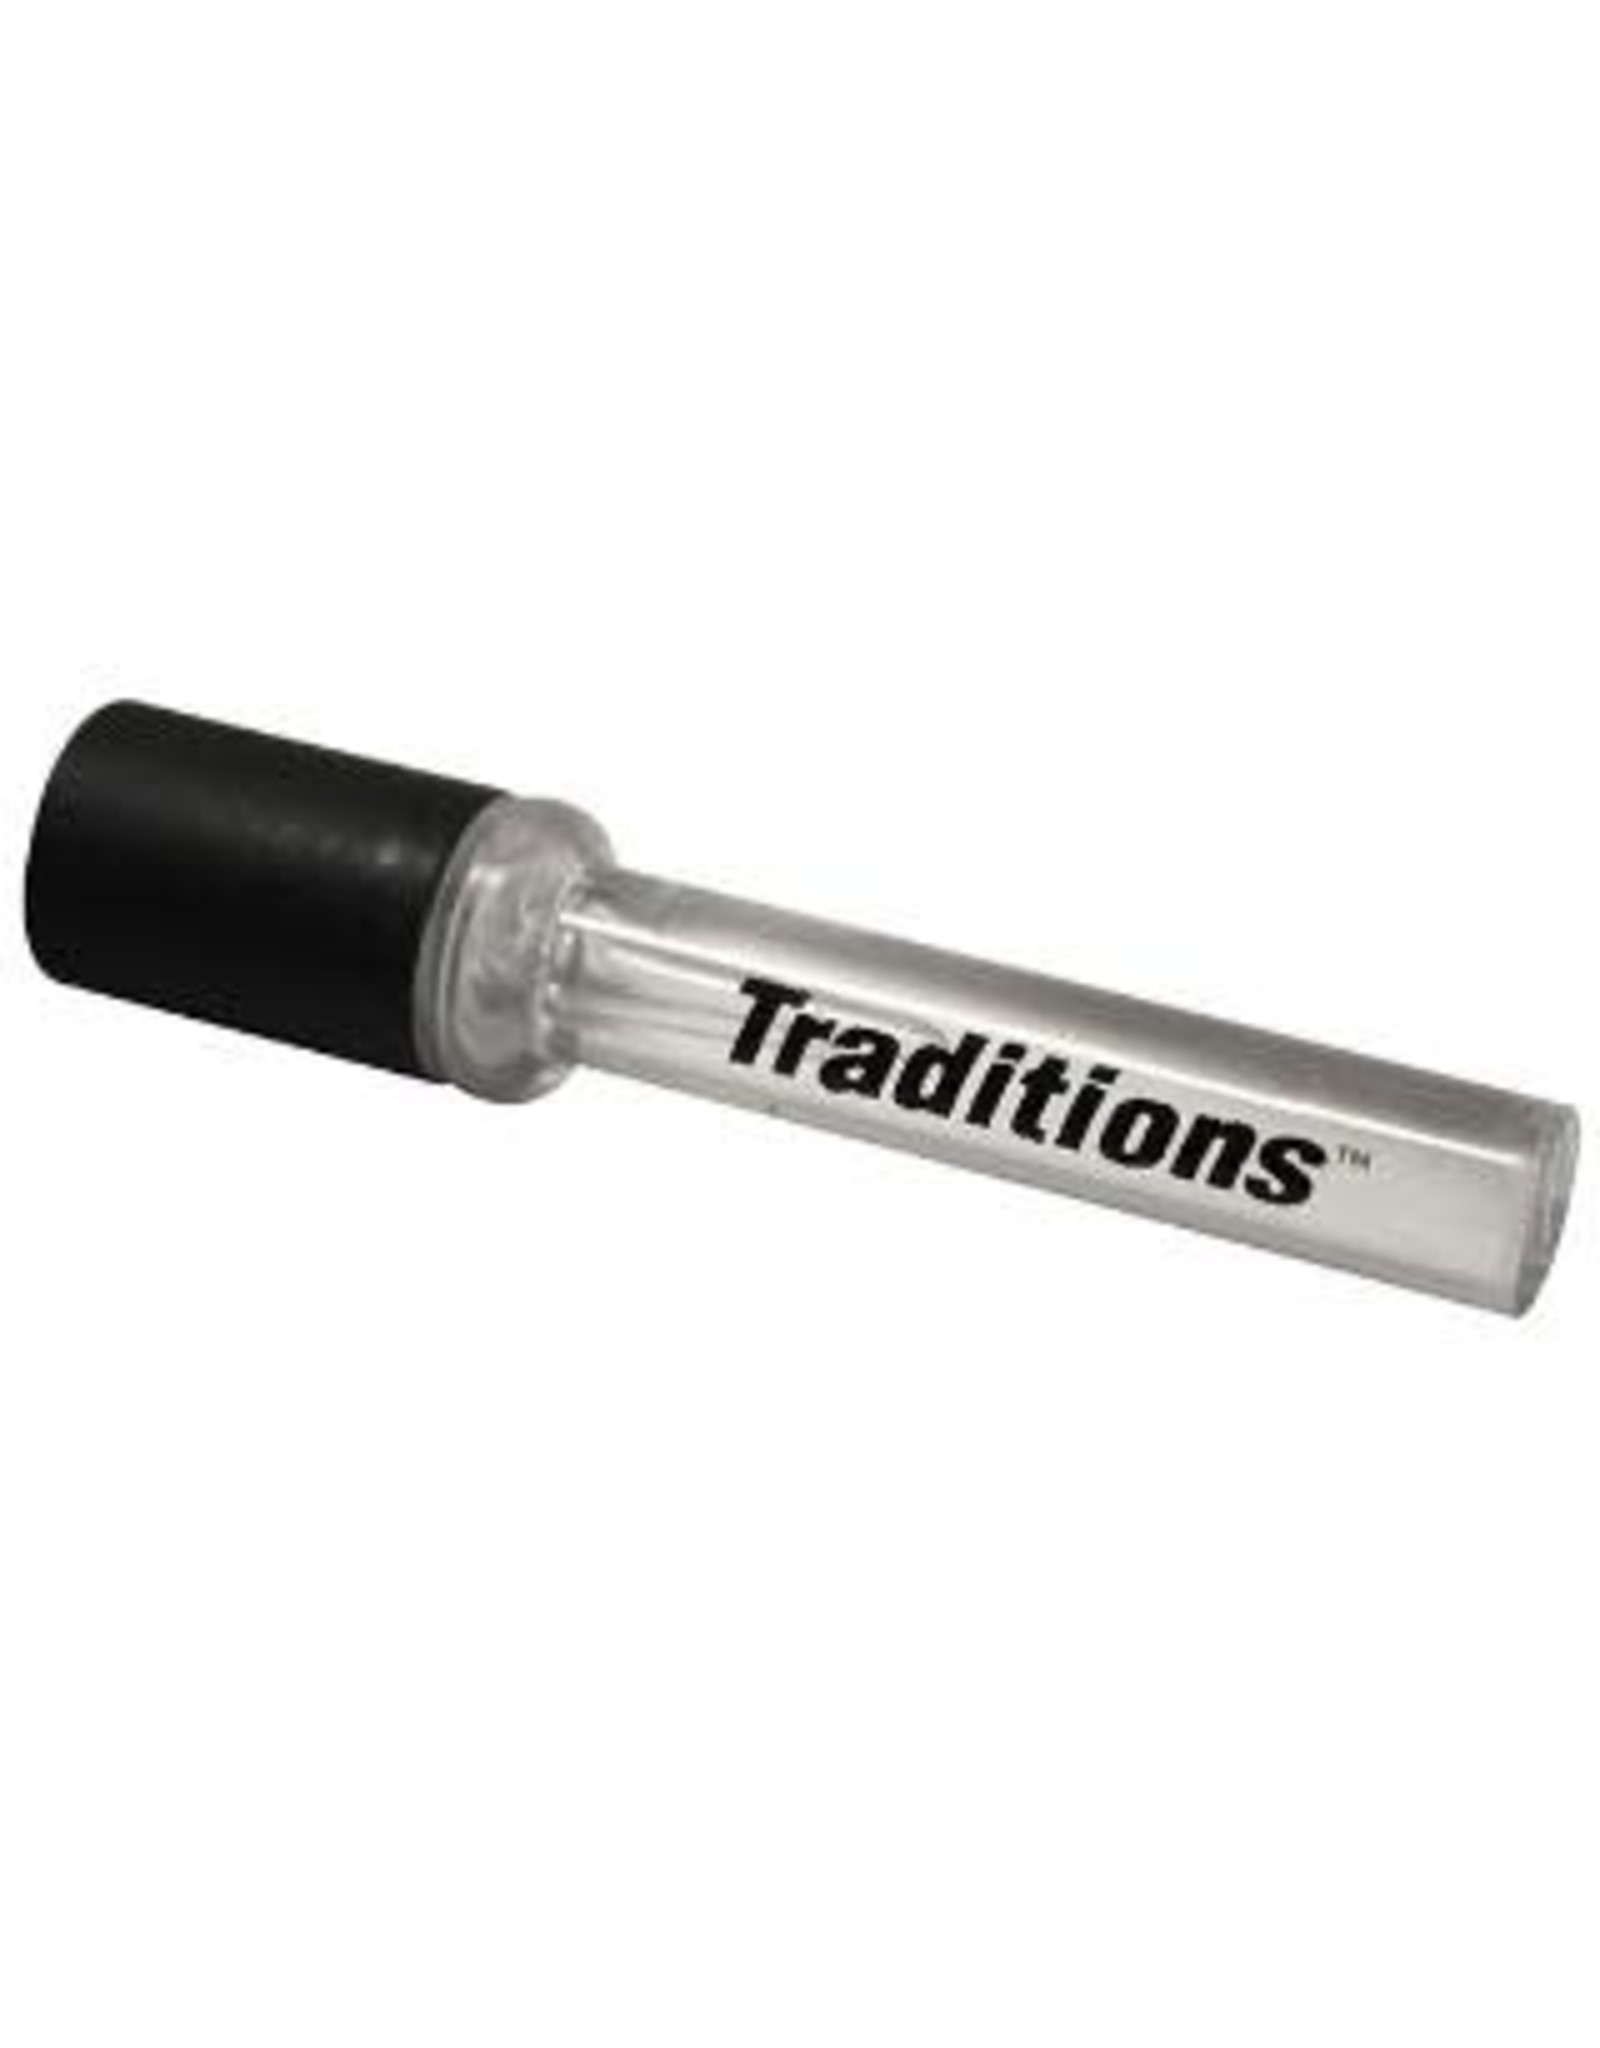 Traditions Traditions 50 Cal LED Bore Light